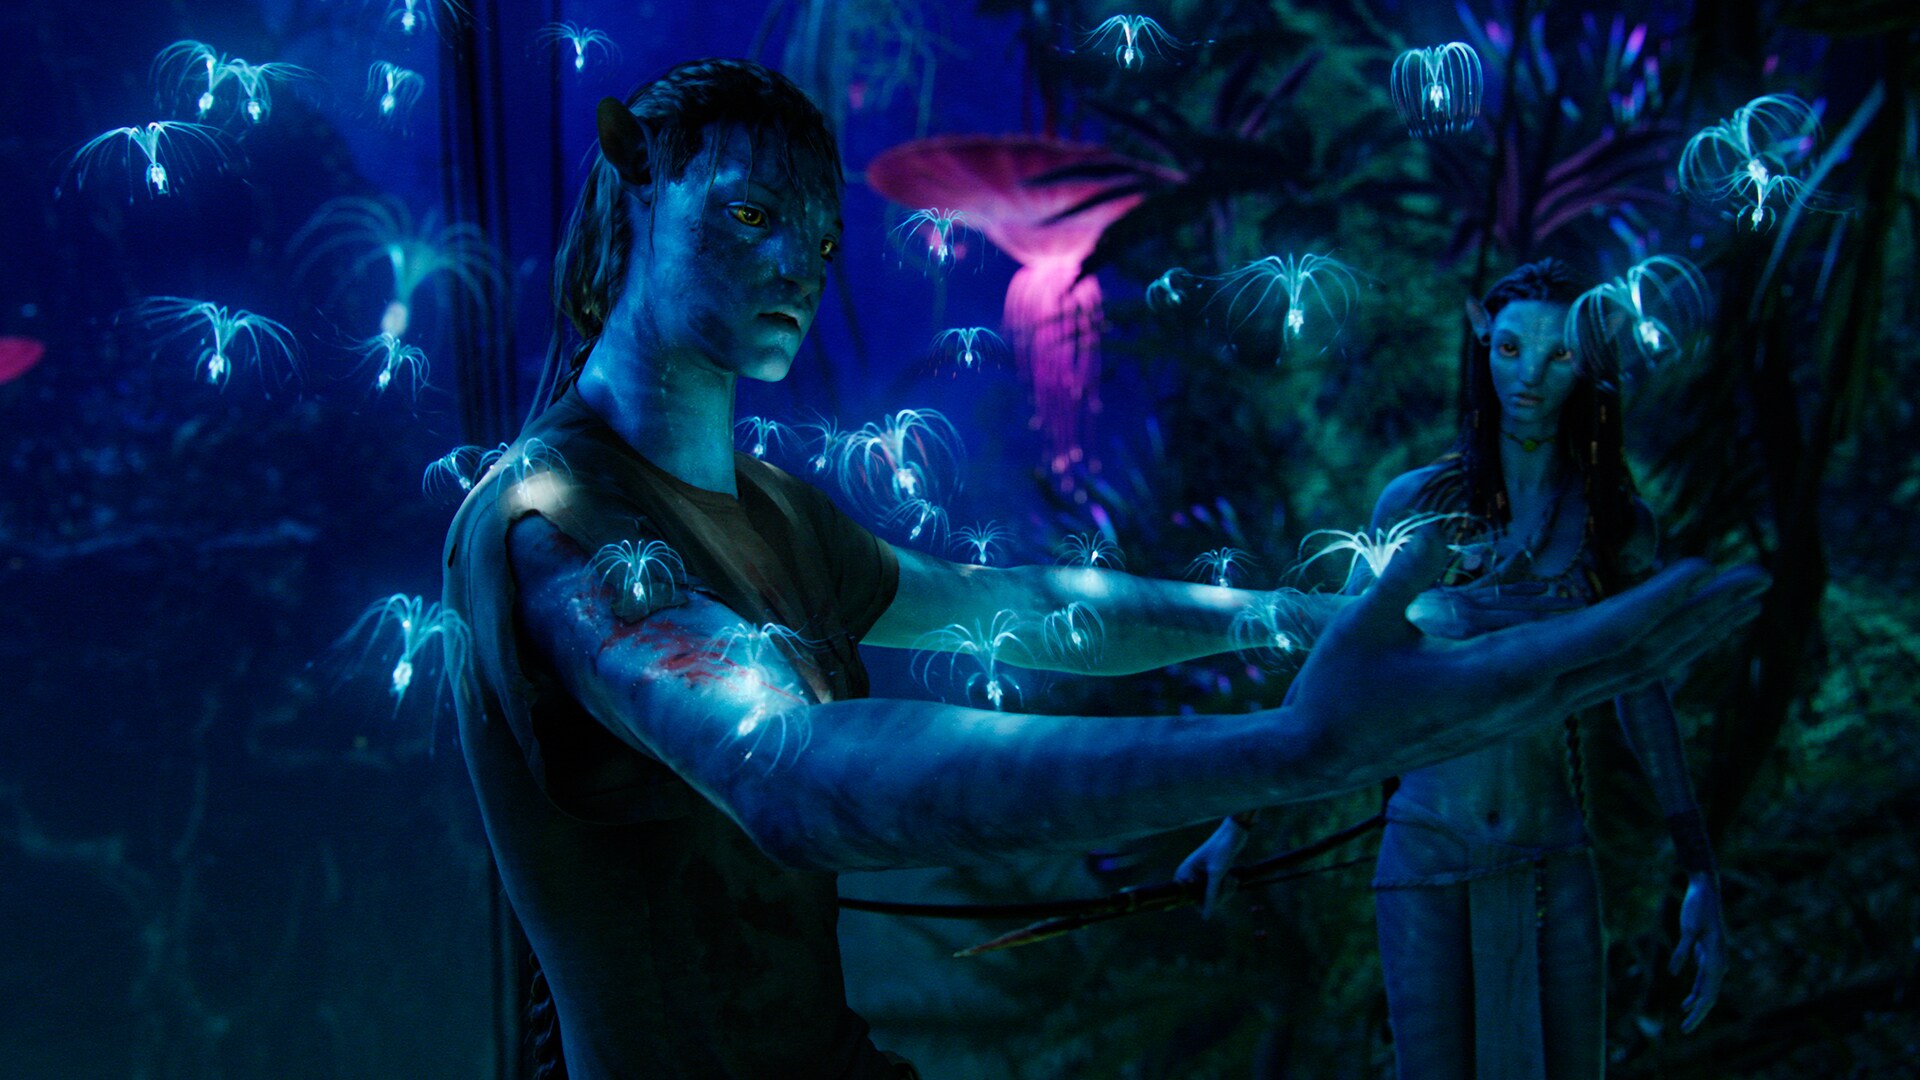 An Inside Look at the World of Avatar with Joshua Izzo